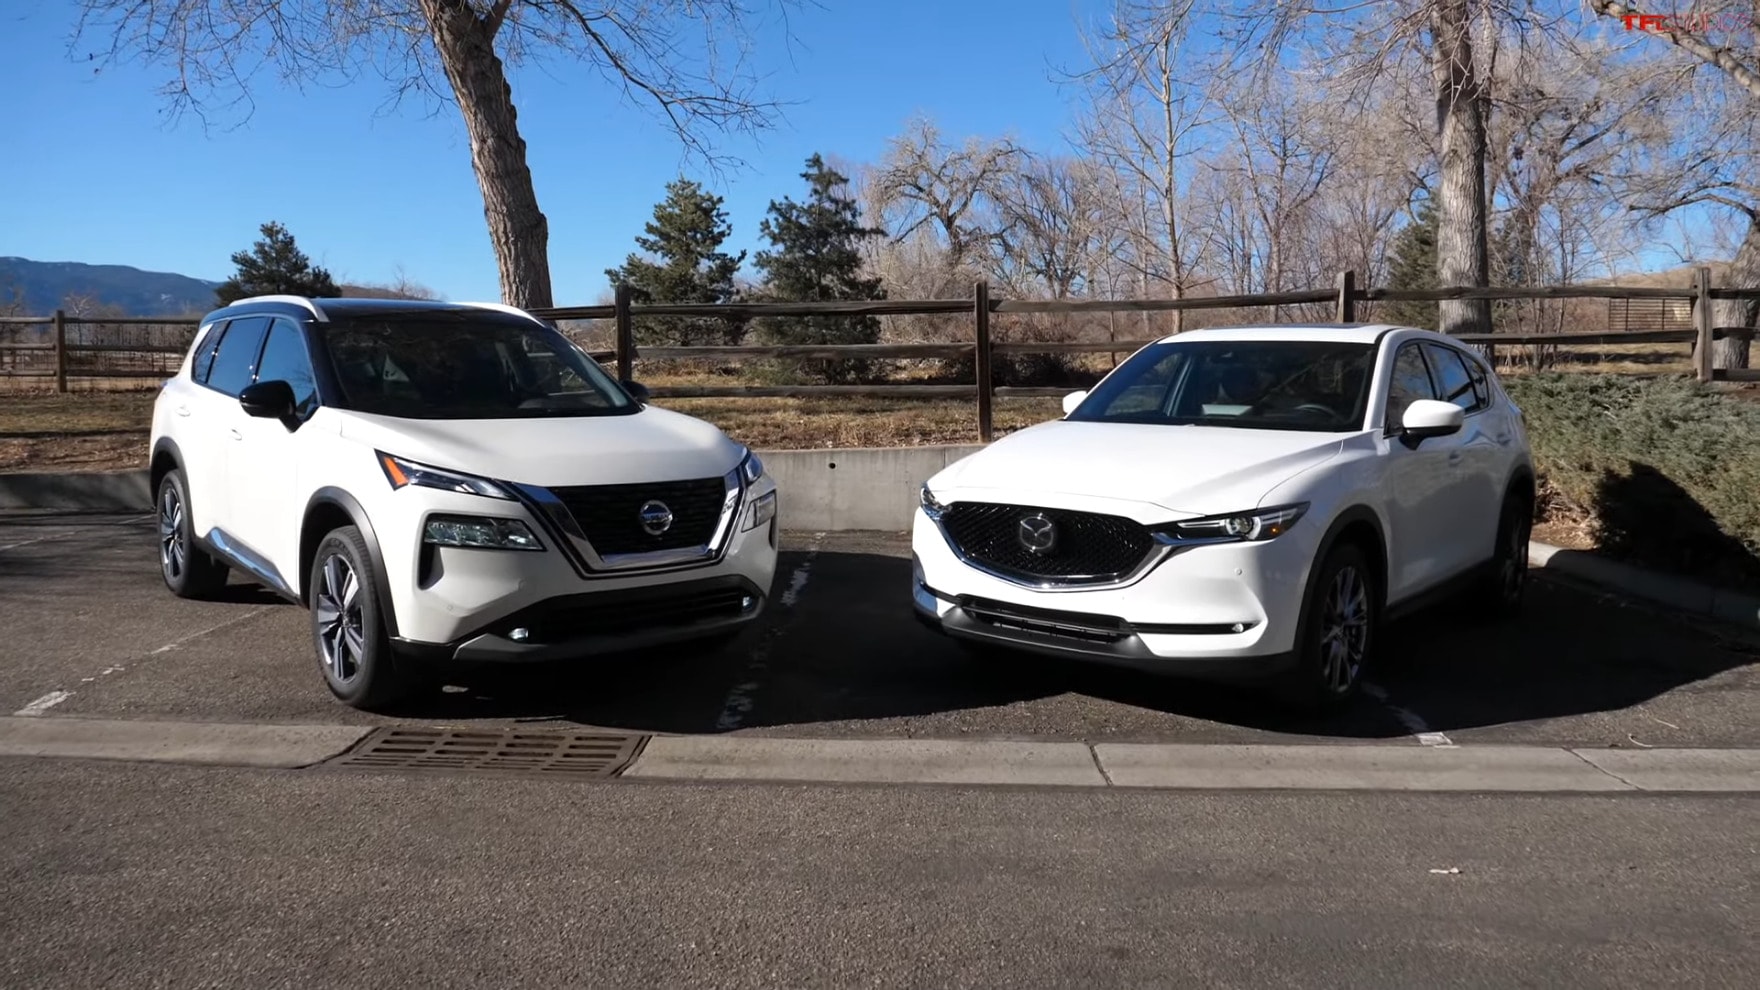 2021 Nissan Rogue vs Mazda CX5 What's the Best Crossover for 38,000